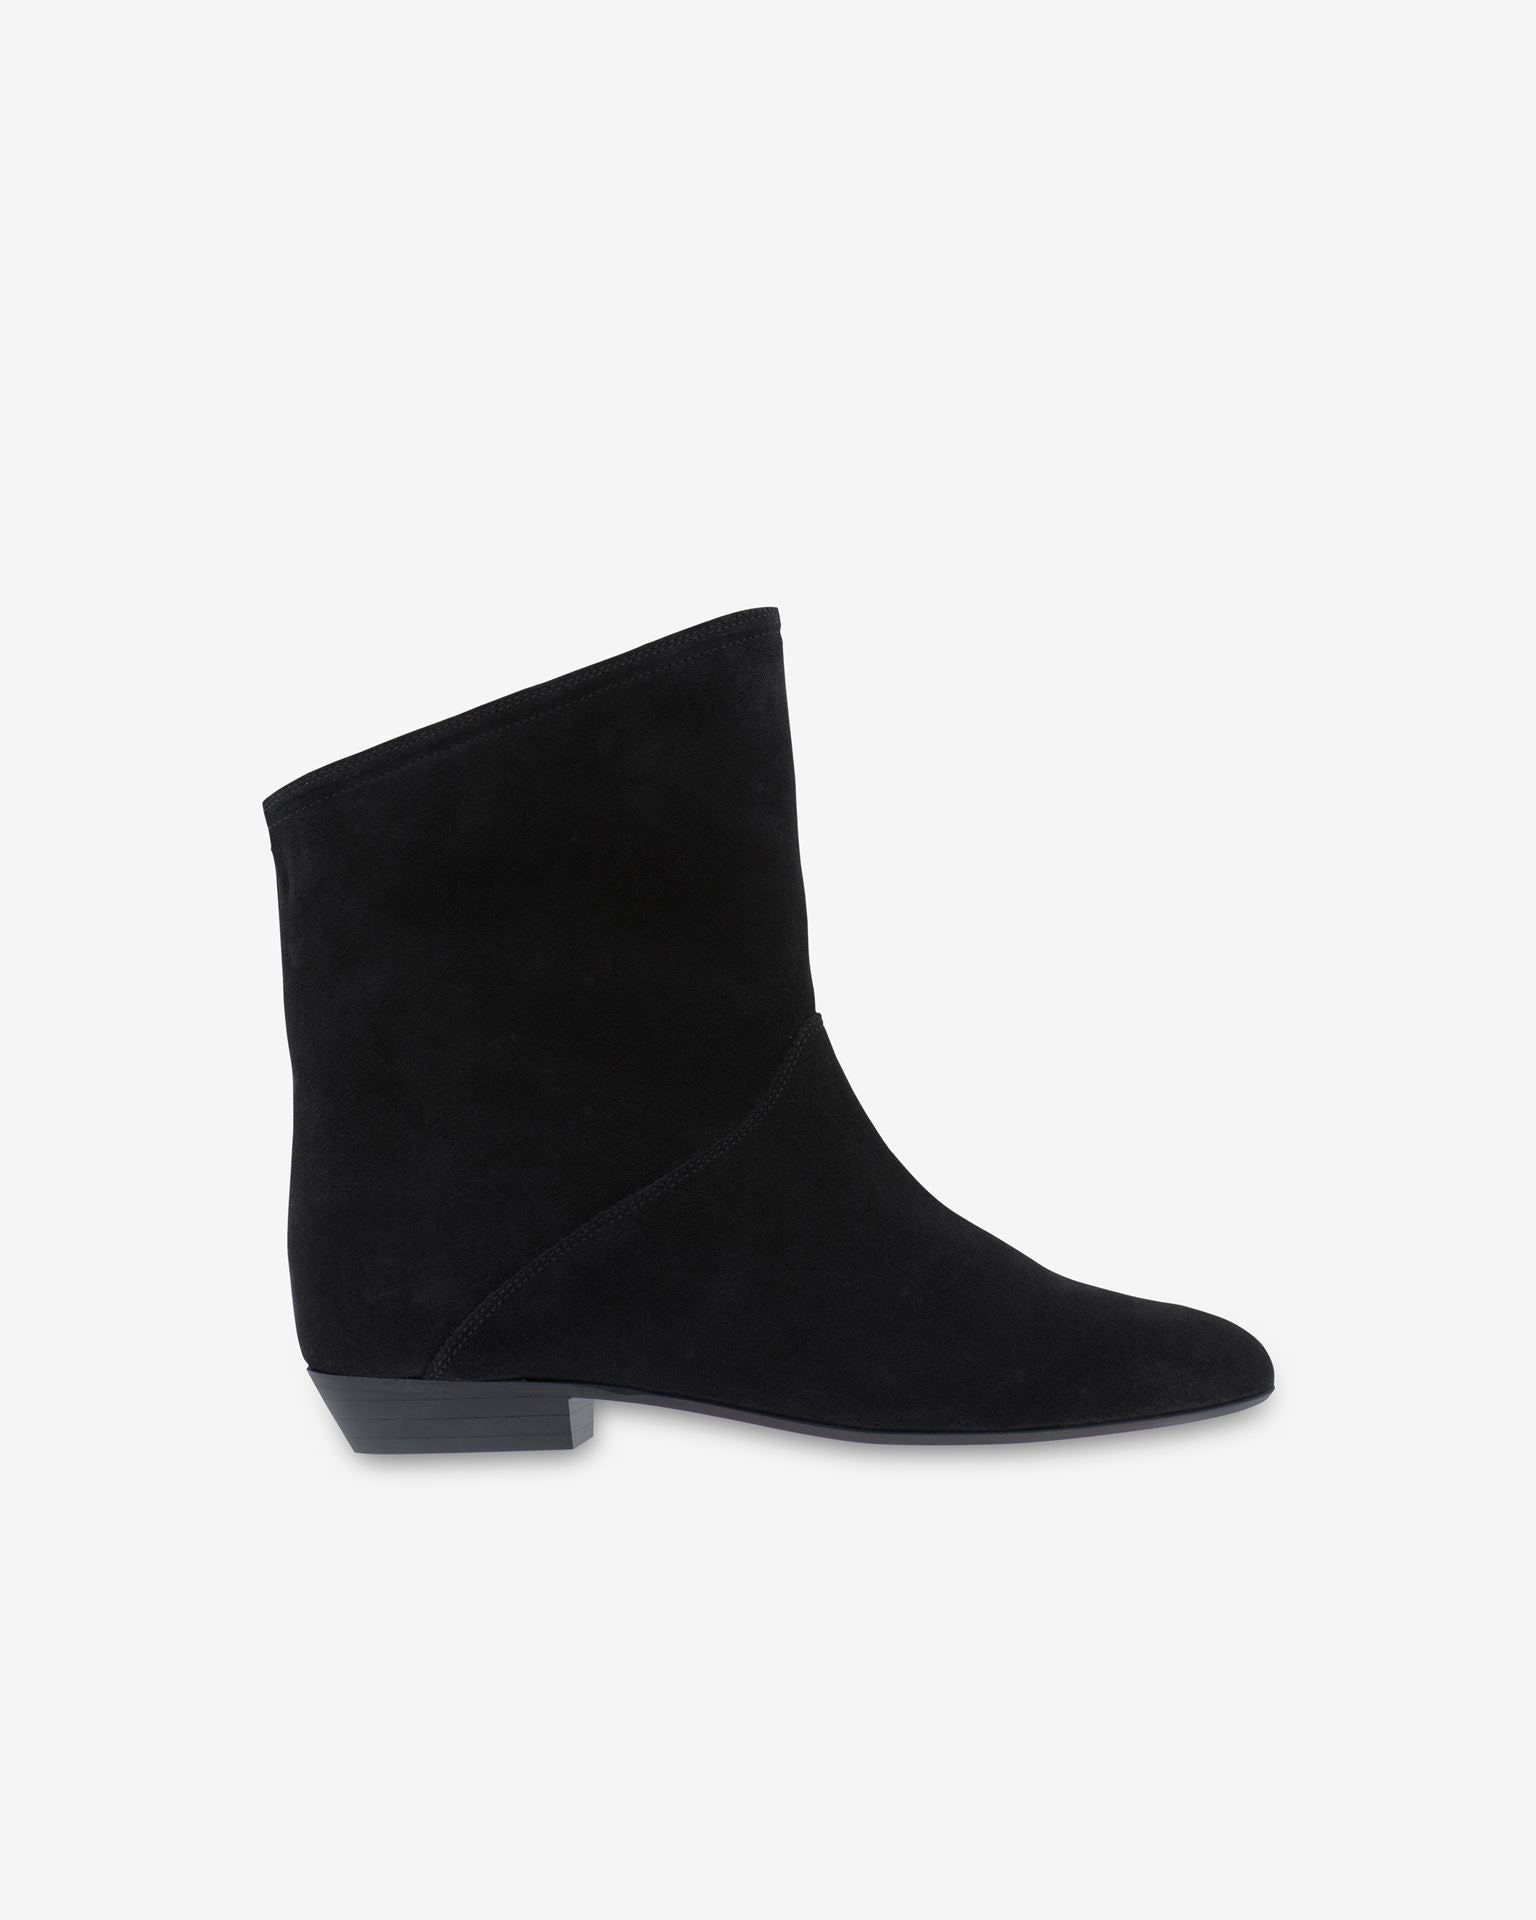 Solvan suede leather ankle boots